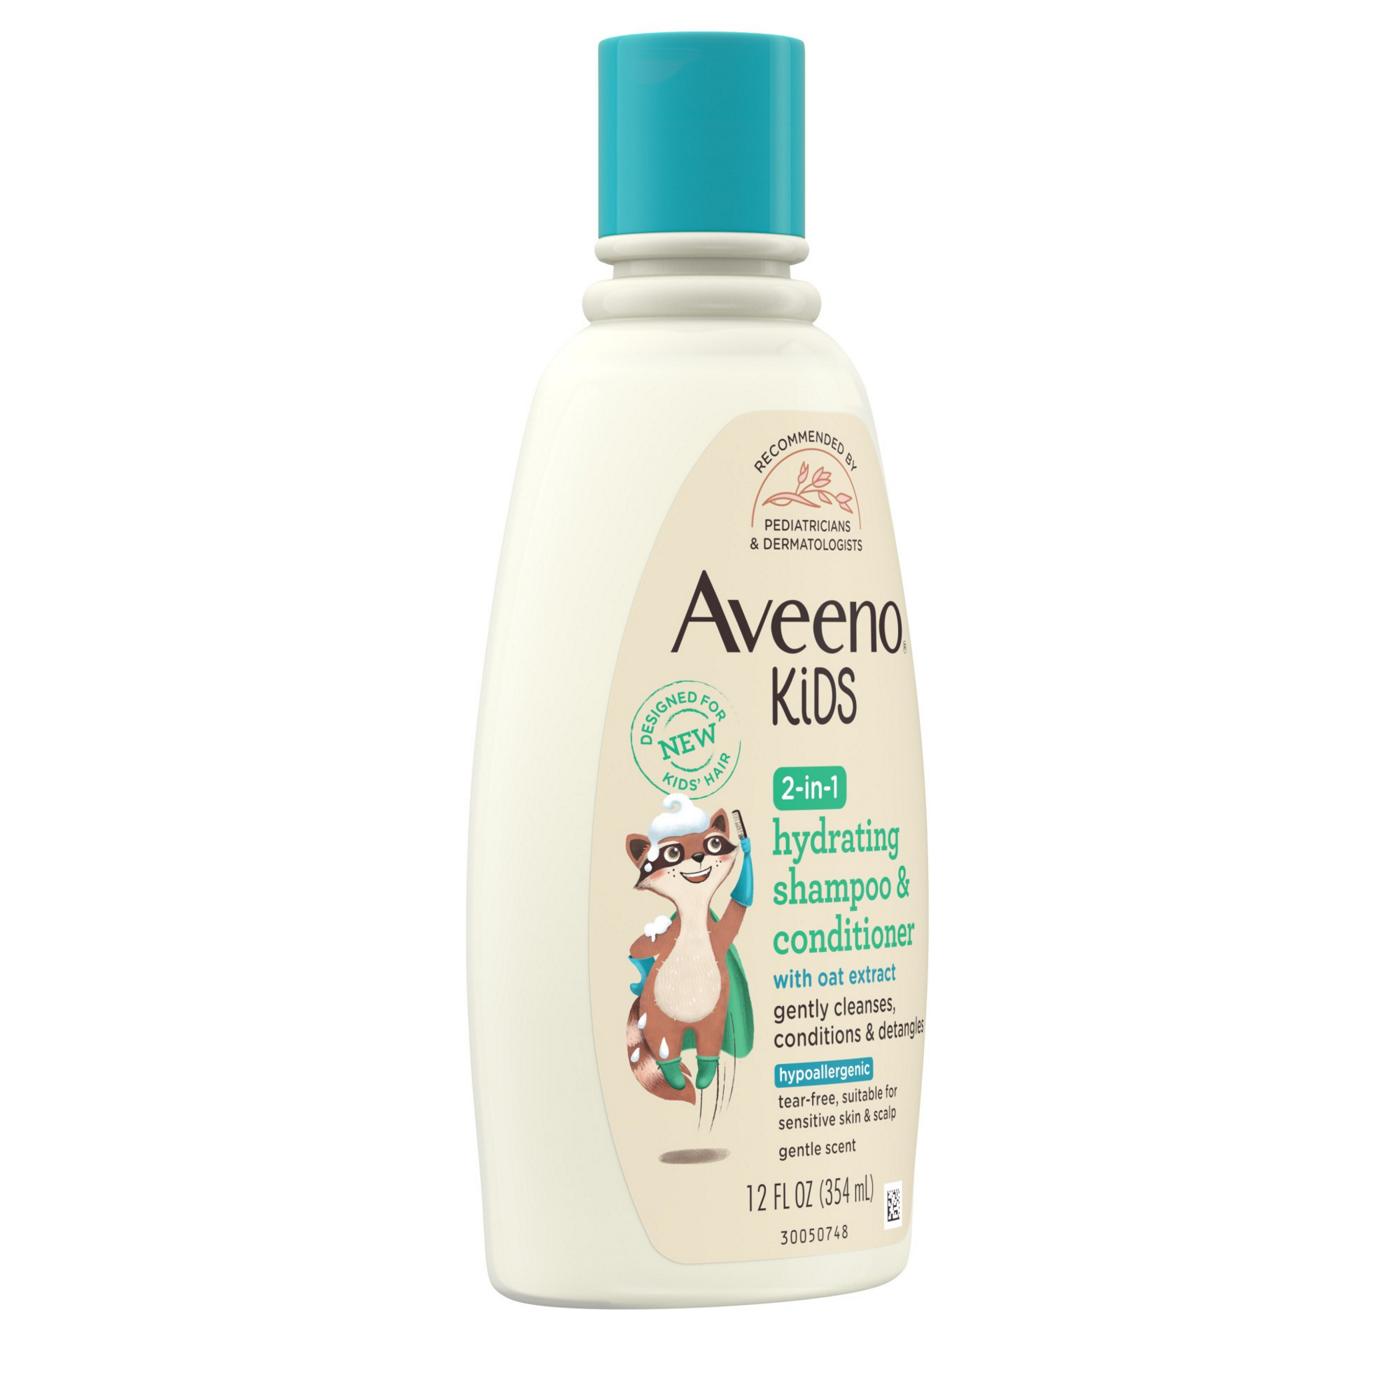 Aveeno Kids 2 in 1 Hydrating Shampoo & Conditioner; image 5 of 5